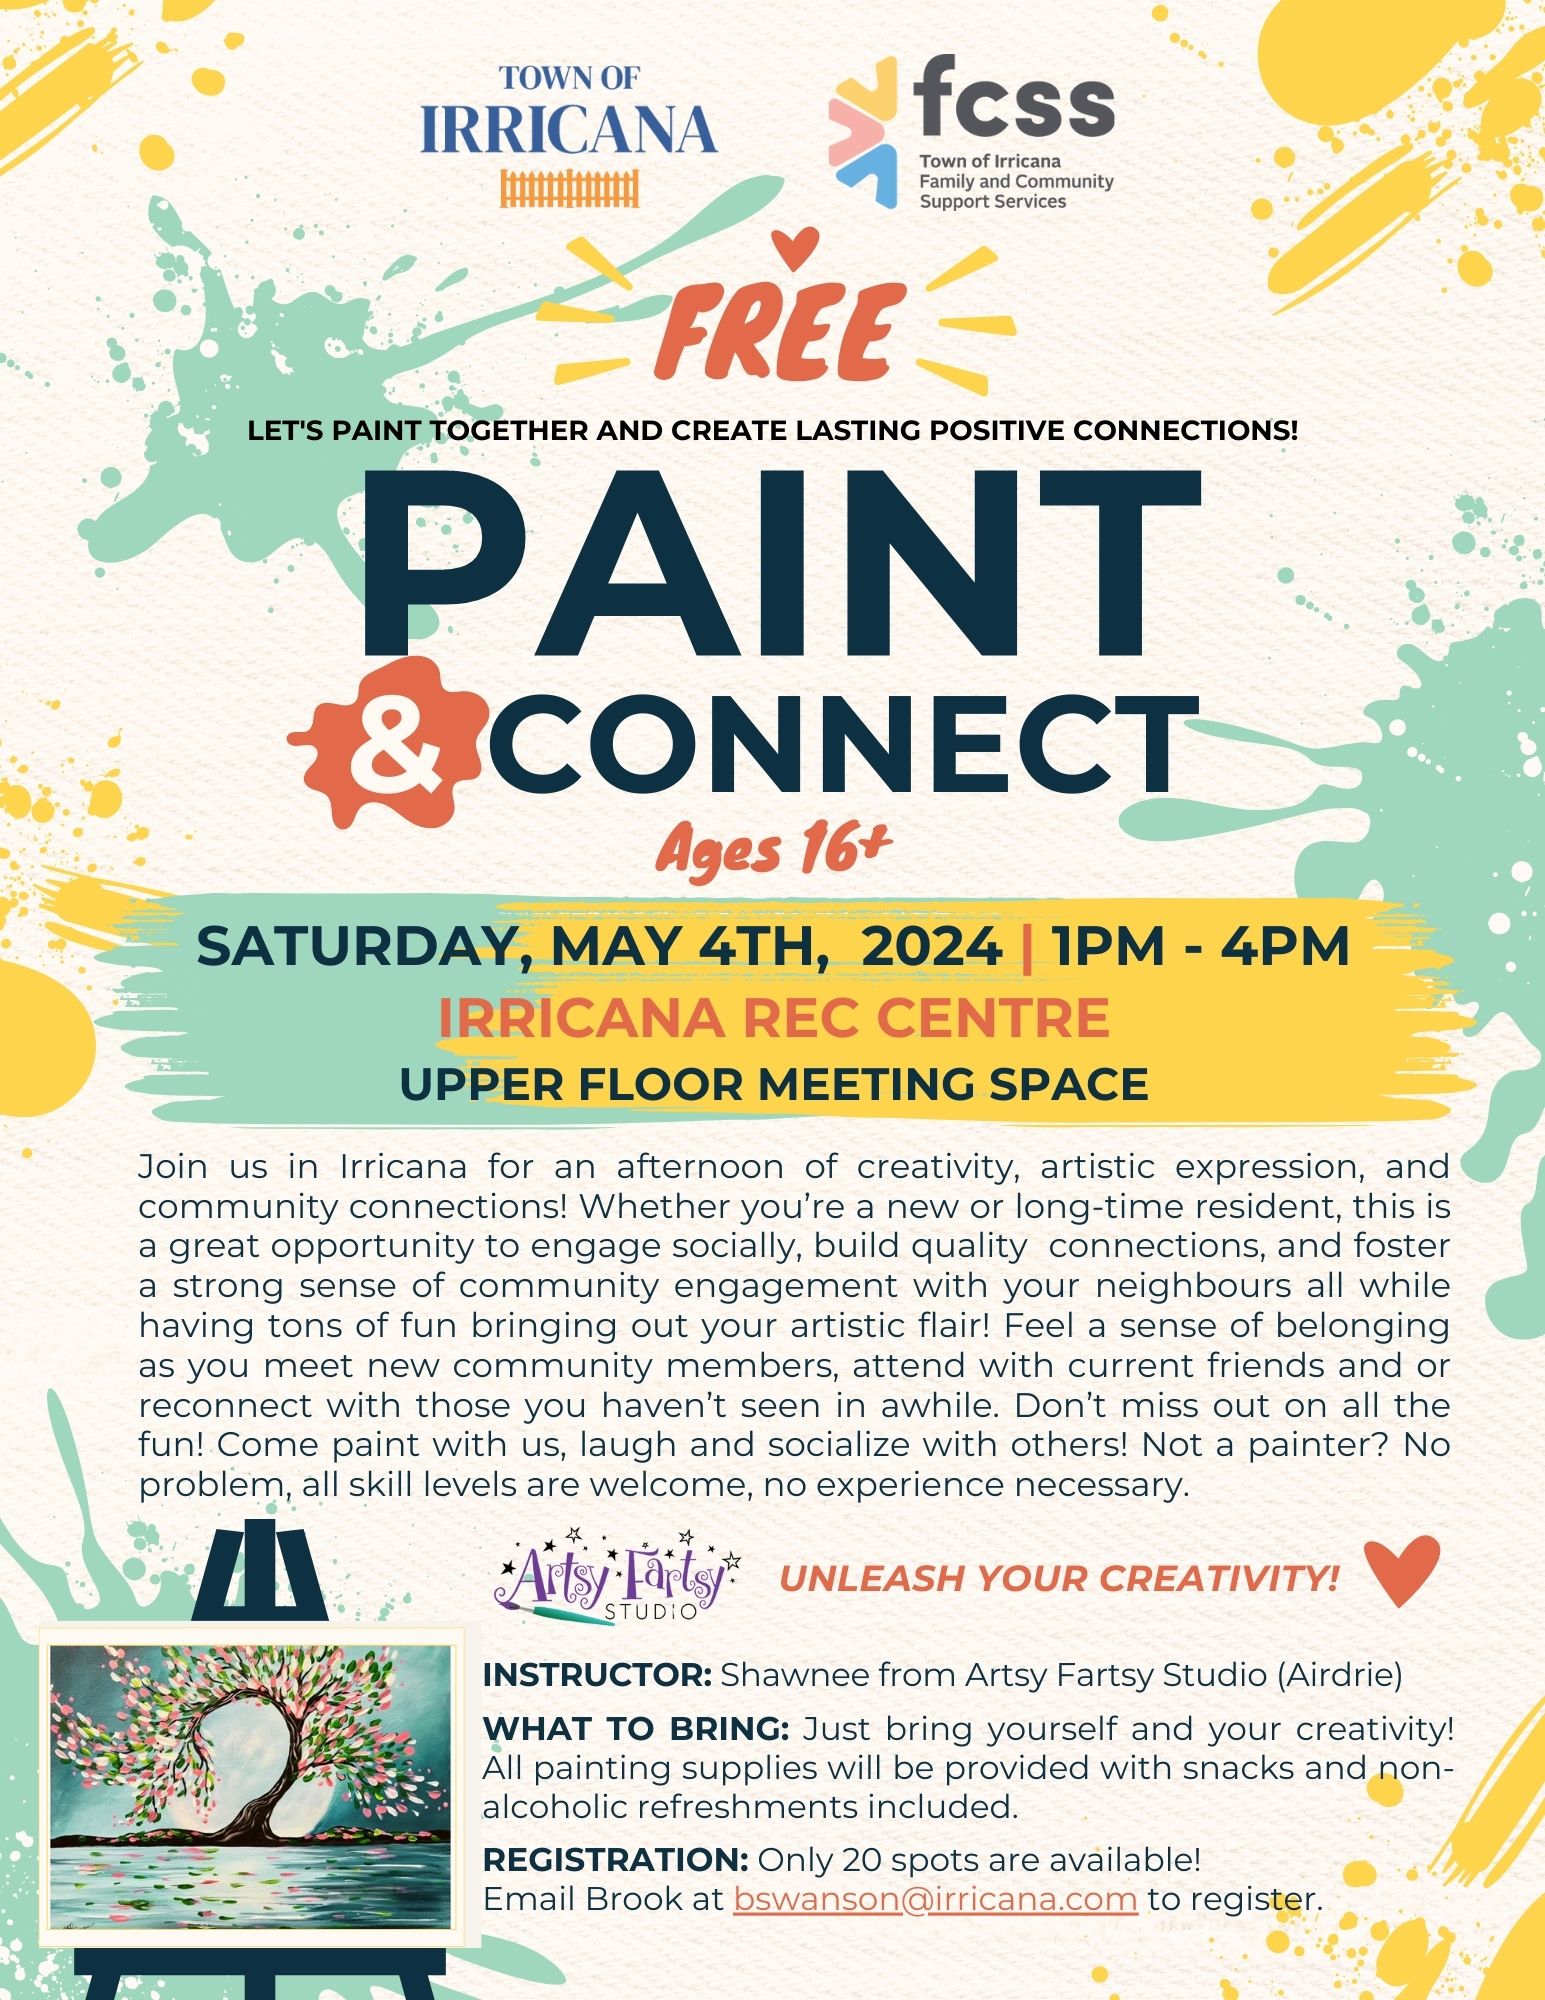 Irricana Paint and Connect Event Saturday, May 4th, 2024 at the Irricana Rec Centre